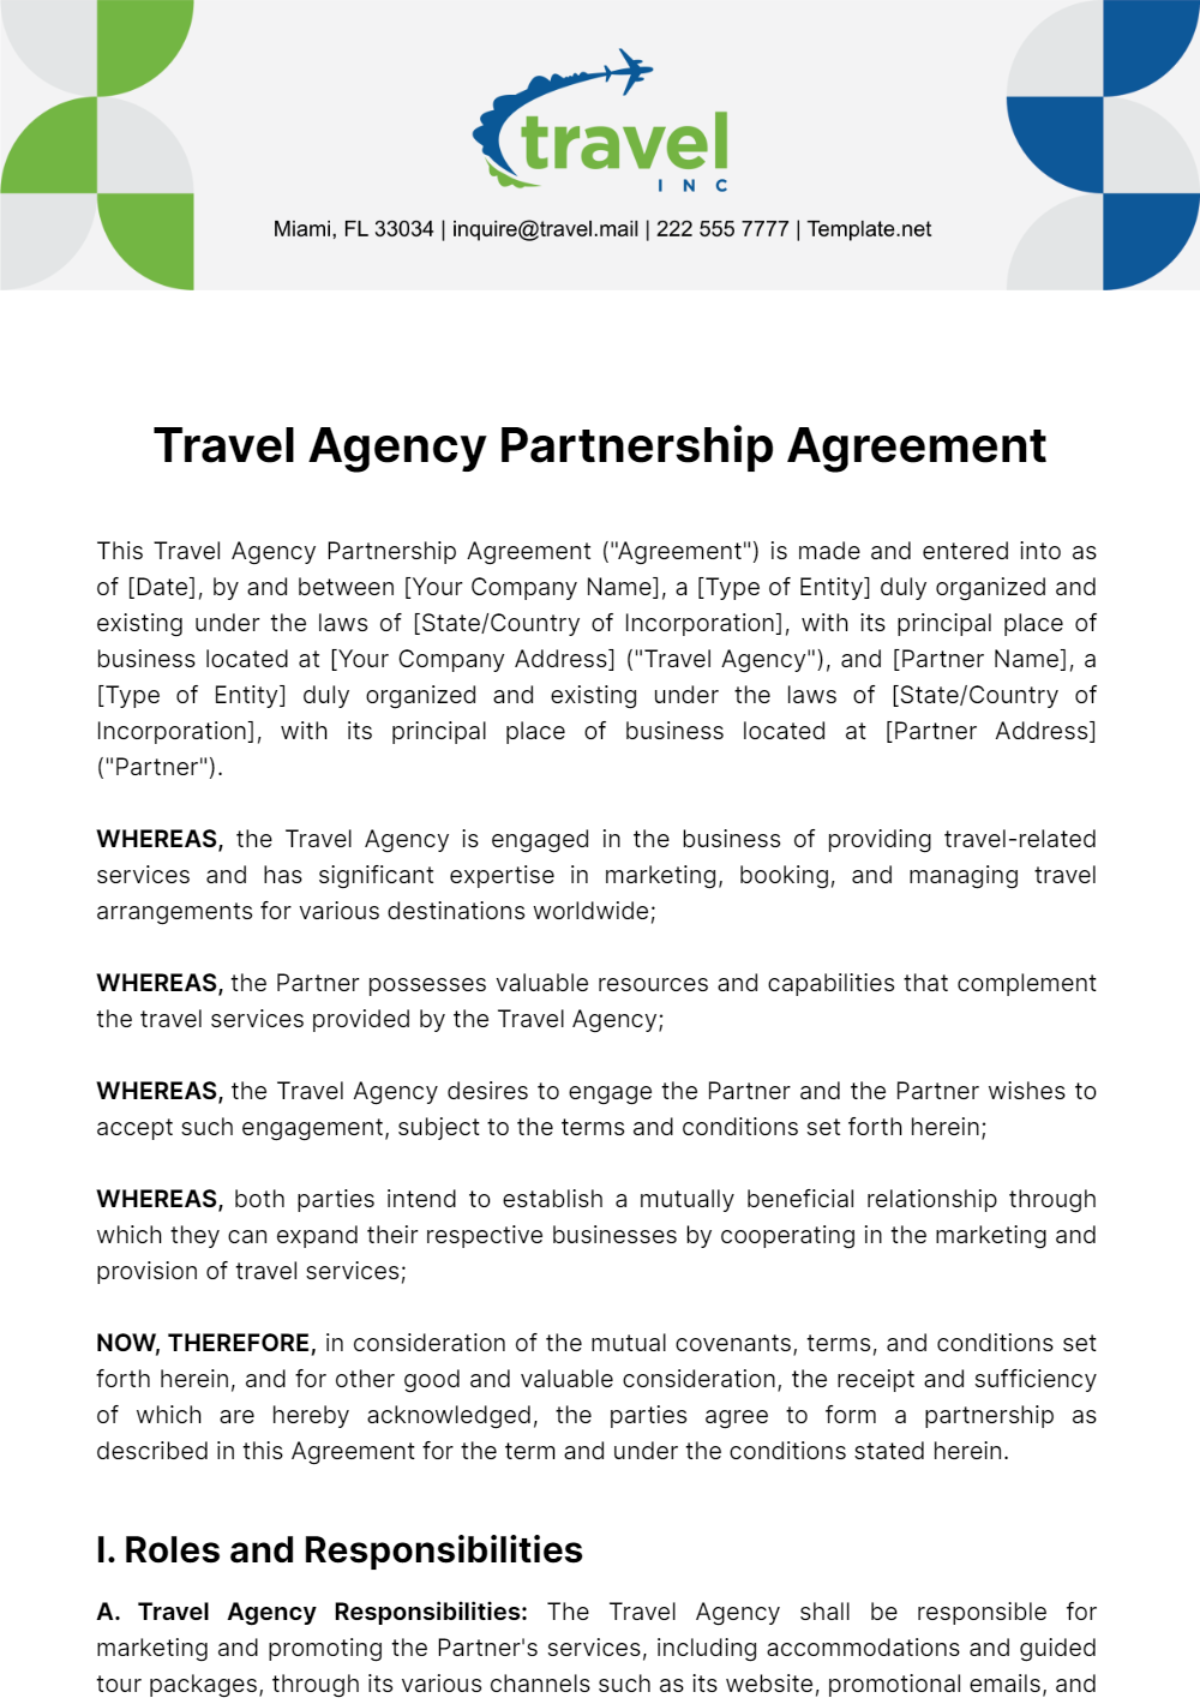 Free Travel Agency Partnership Agreement Template